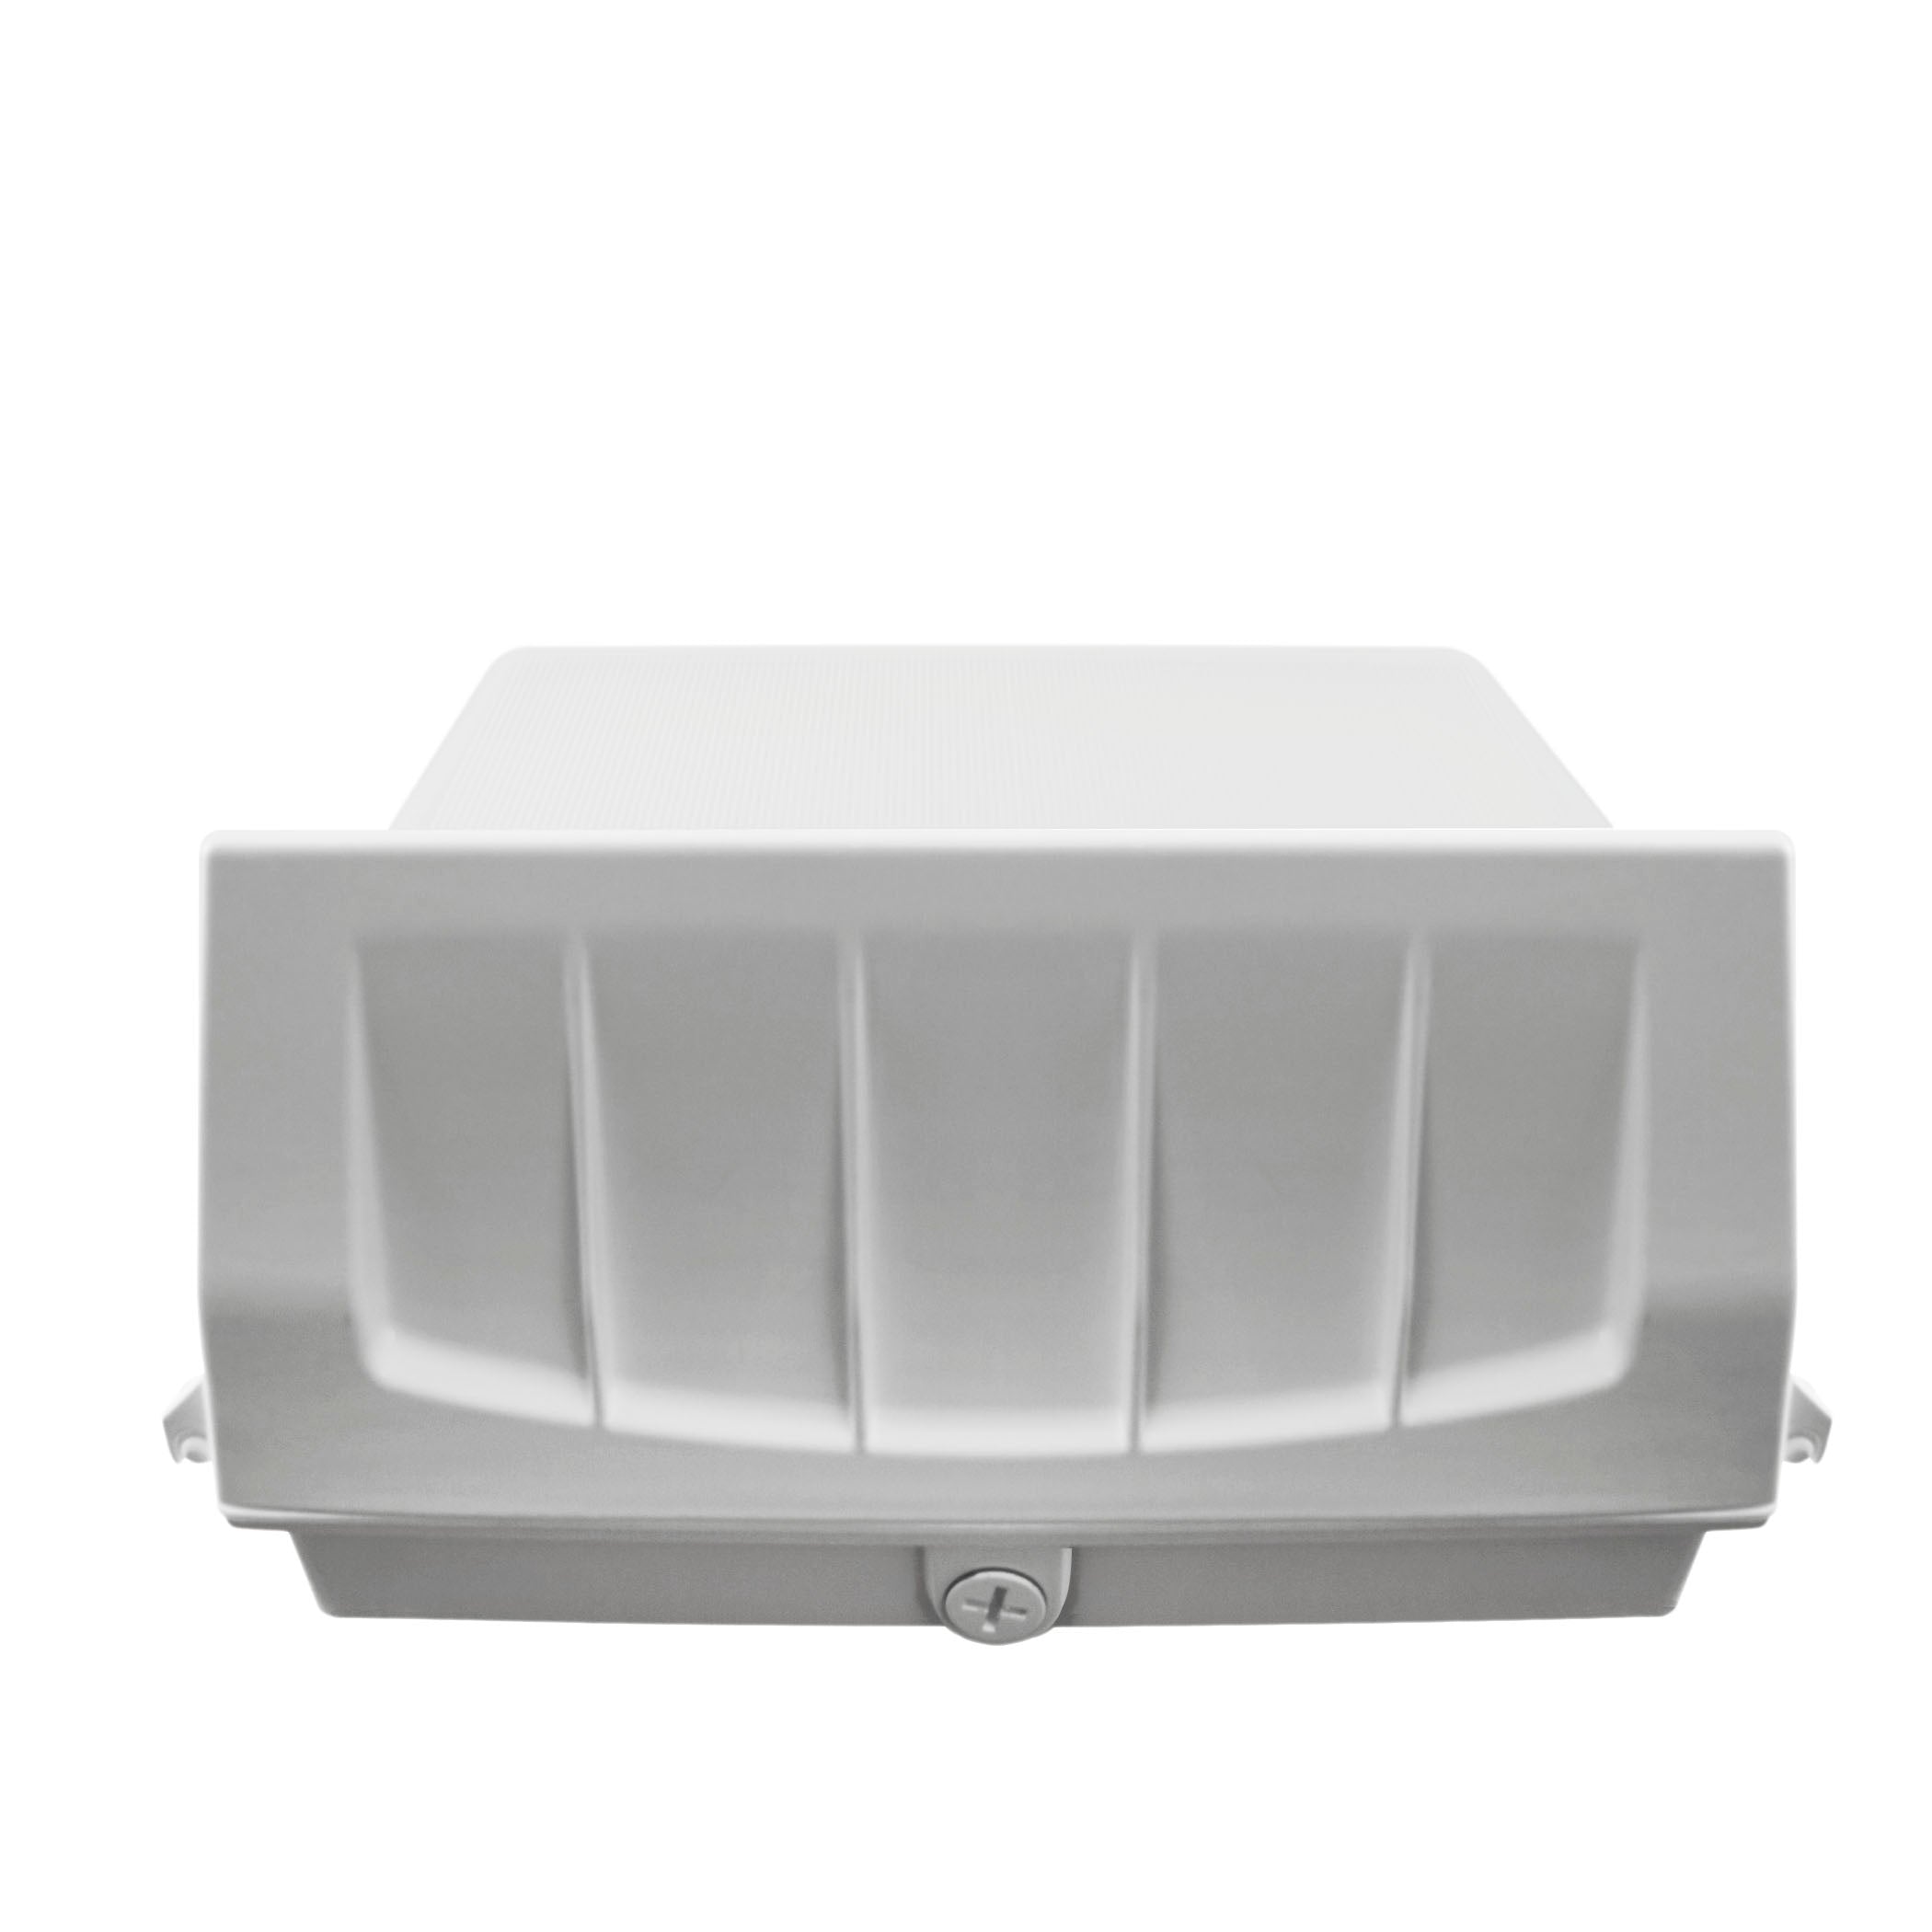 LED Wall Pack Light - 60W - 9,100 Lumens - Photocell Included - SWP3 - Forward Throw - White - DLC Listed